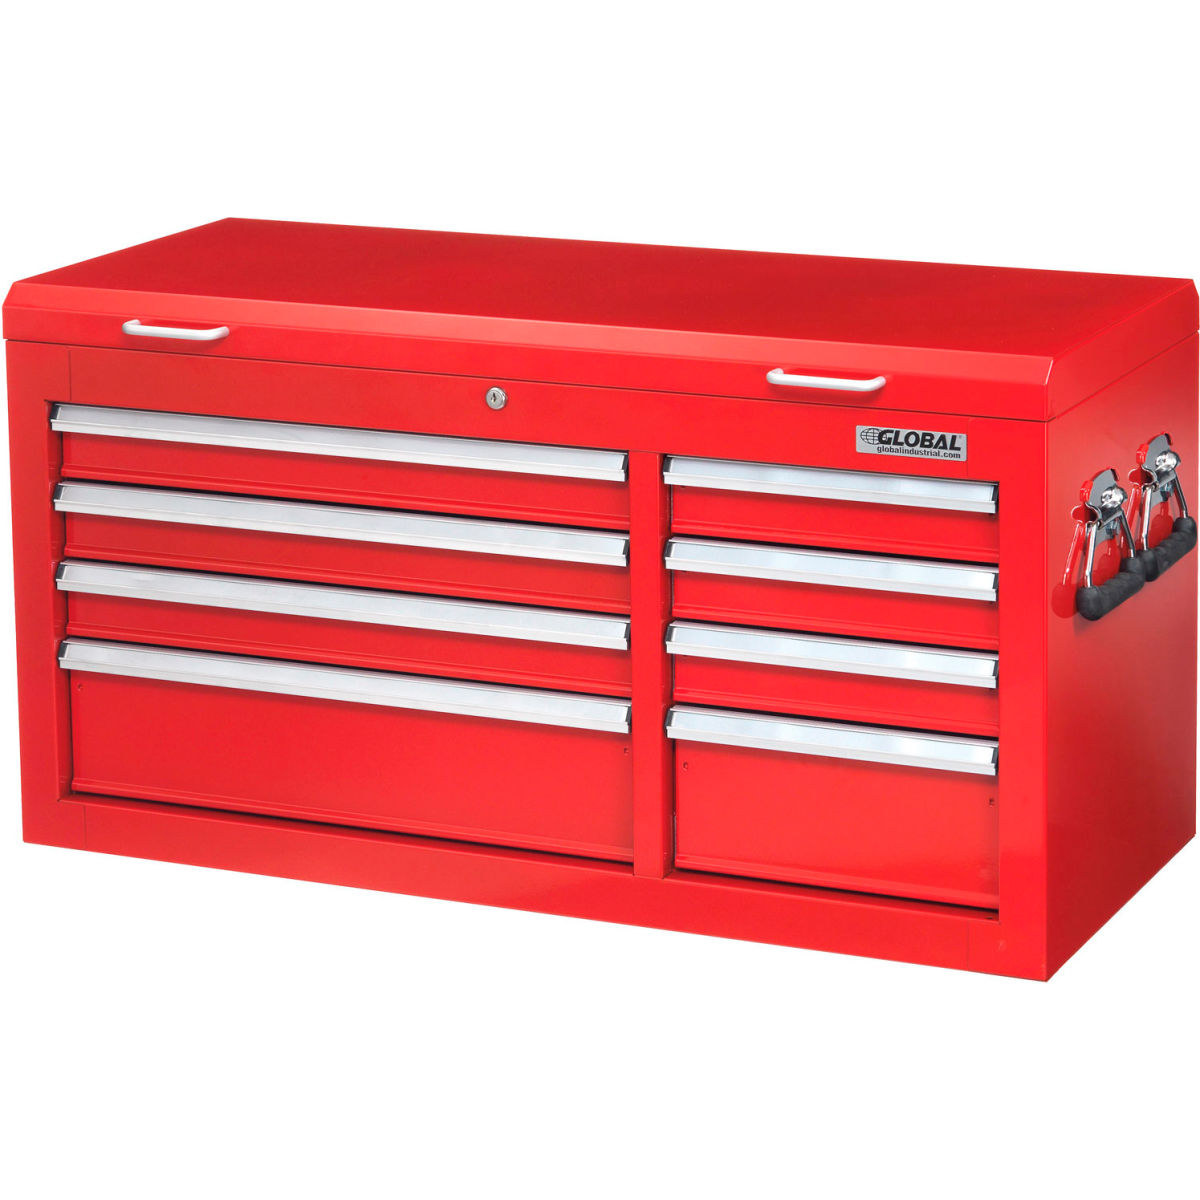 Cromo 8 Drawer Red Tool Chest - 41.37 x 17.93 x 22.25 in.